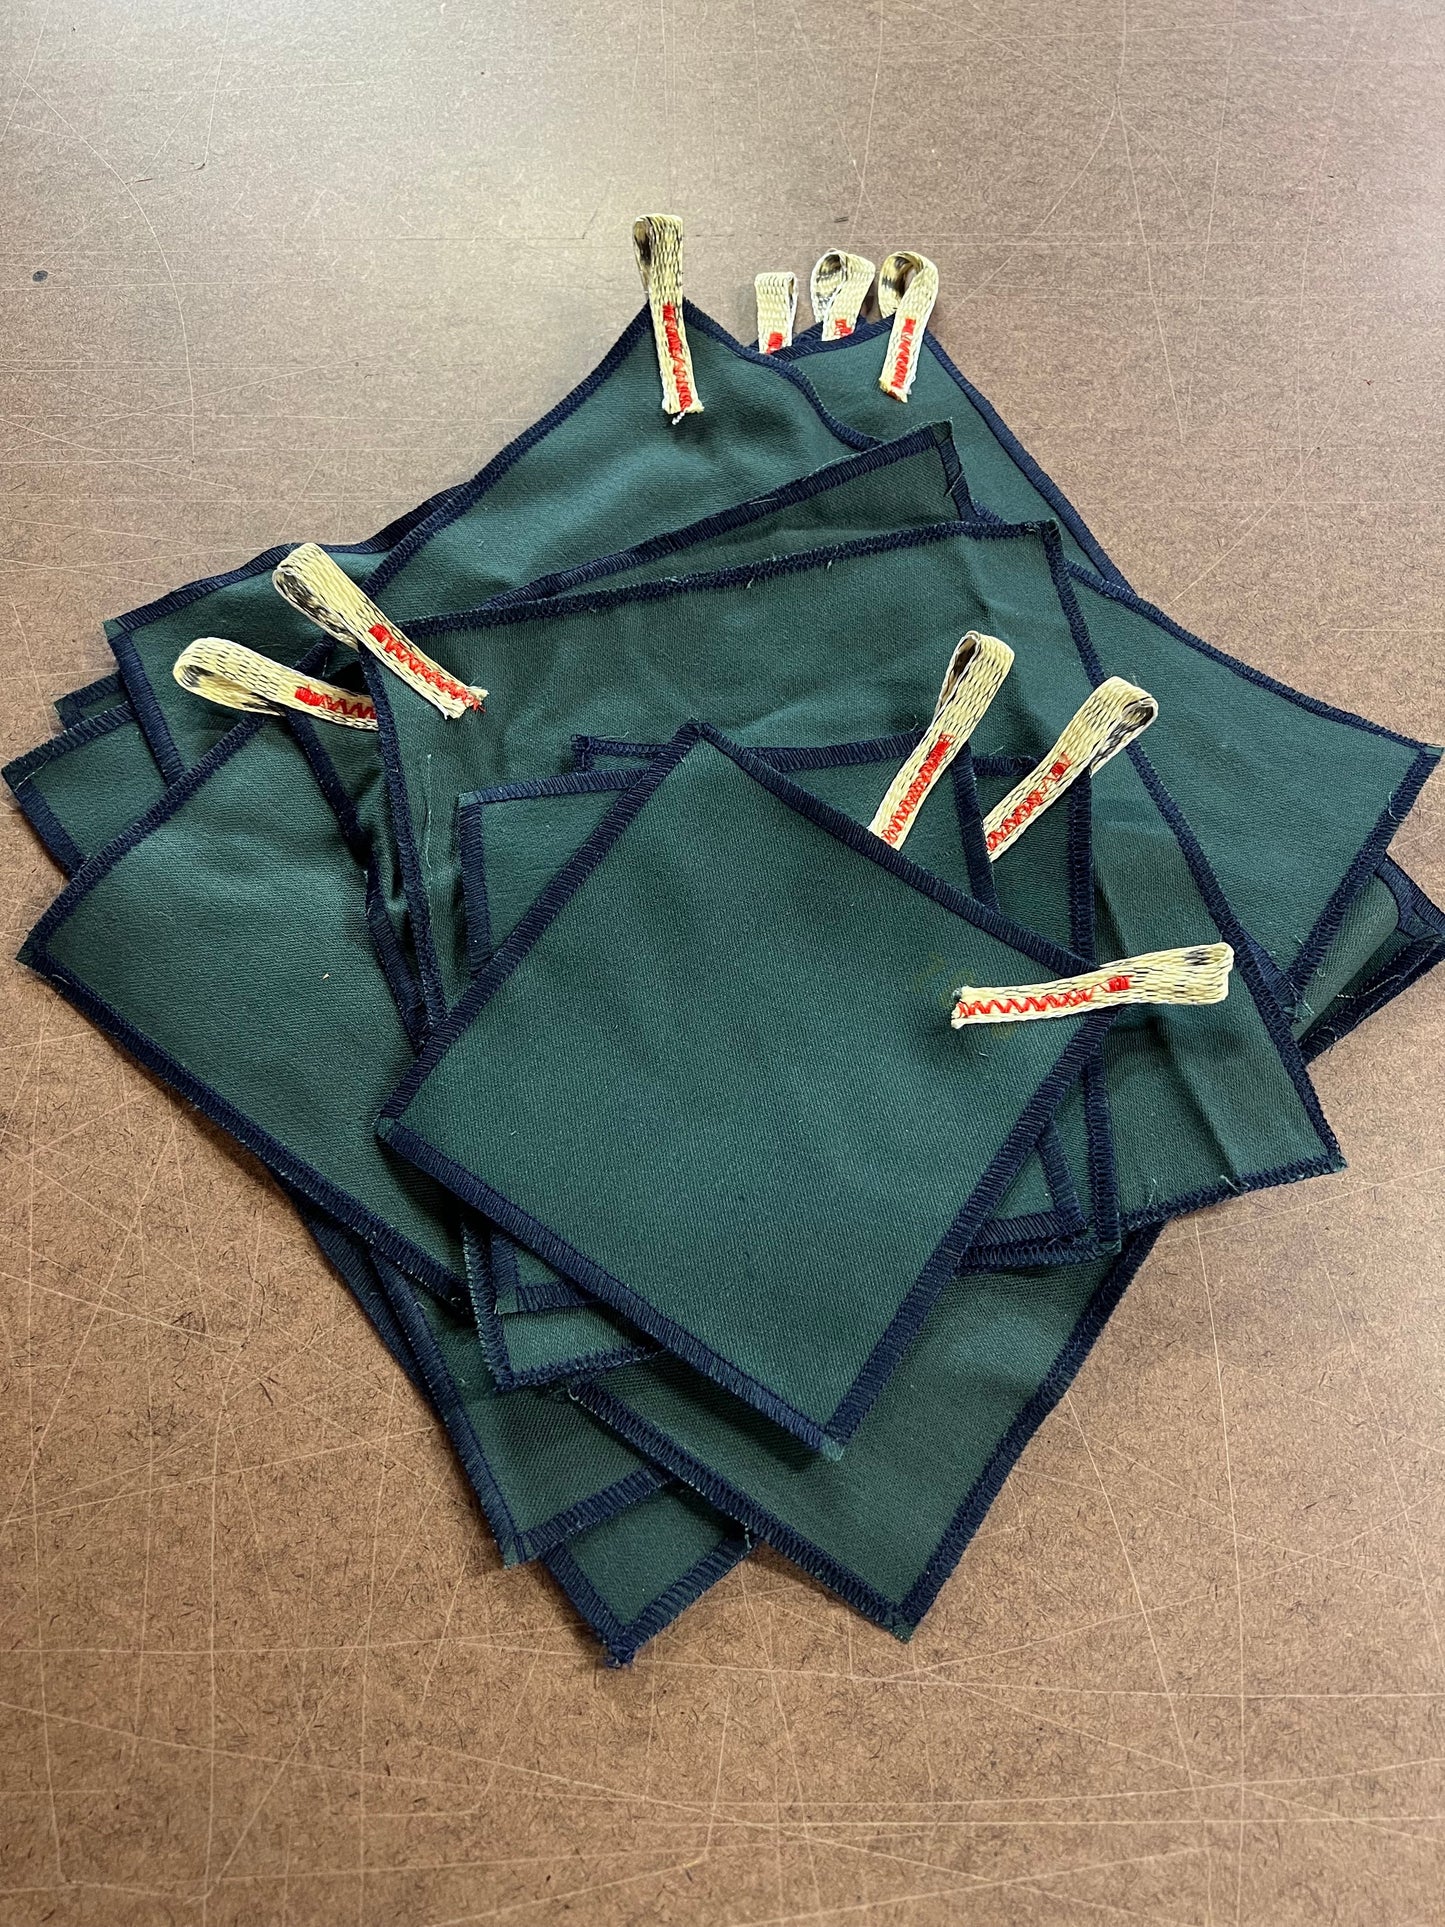 18x18 Nomex Fire Blanket